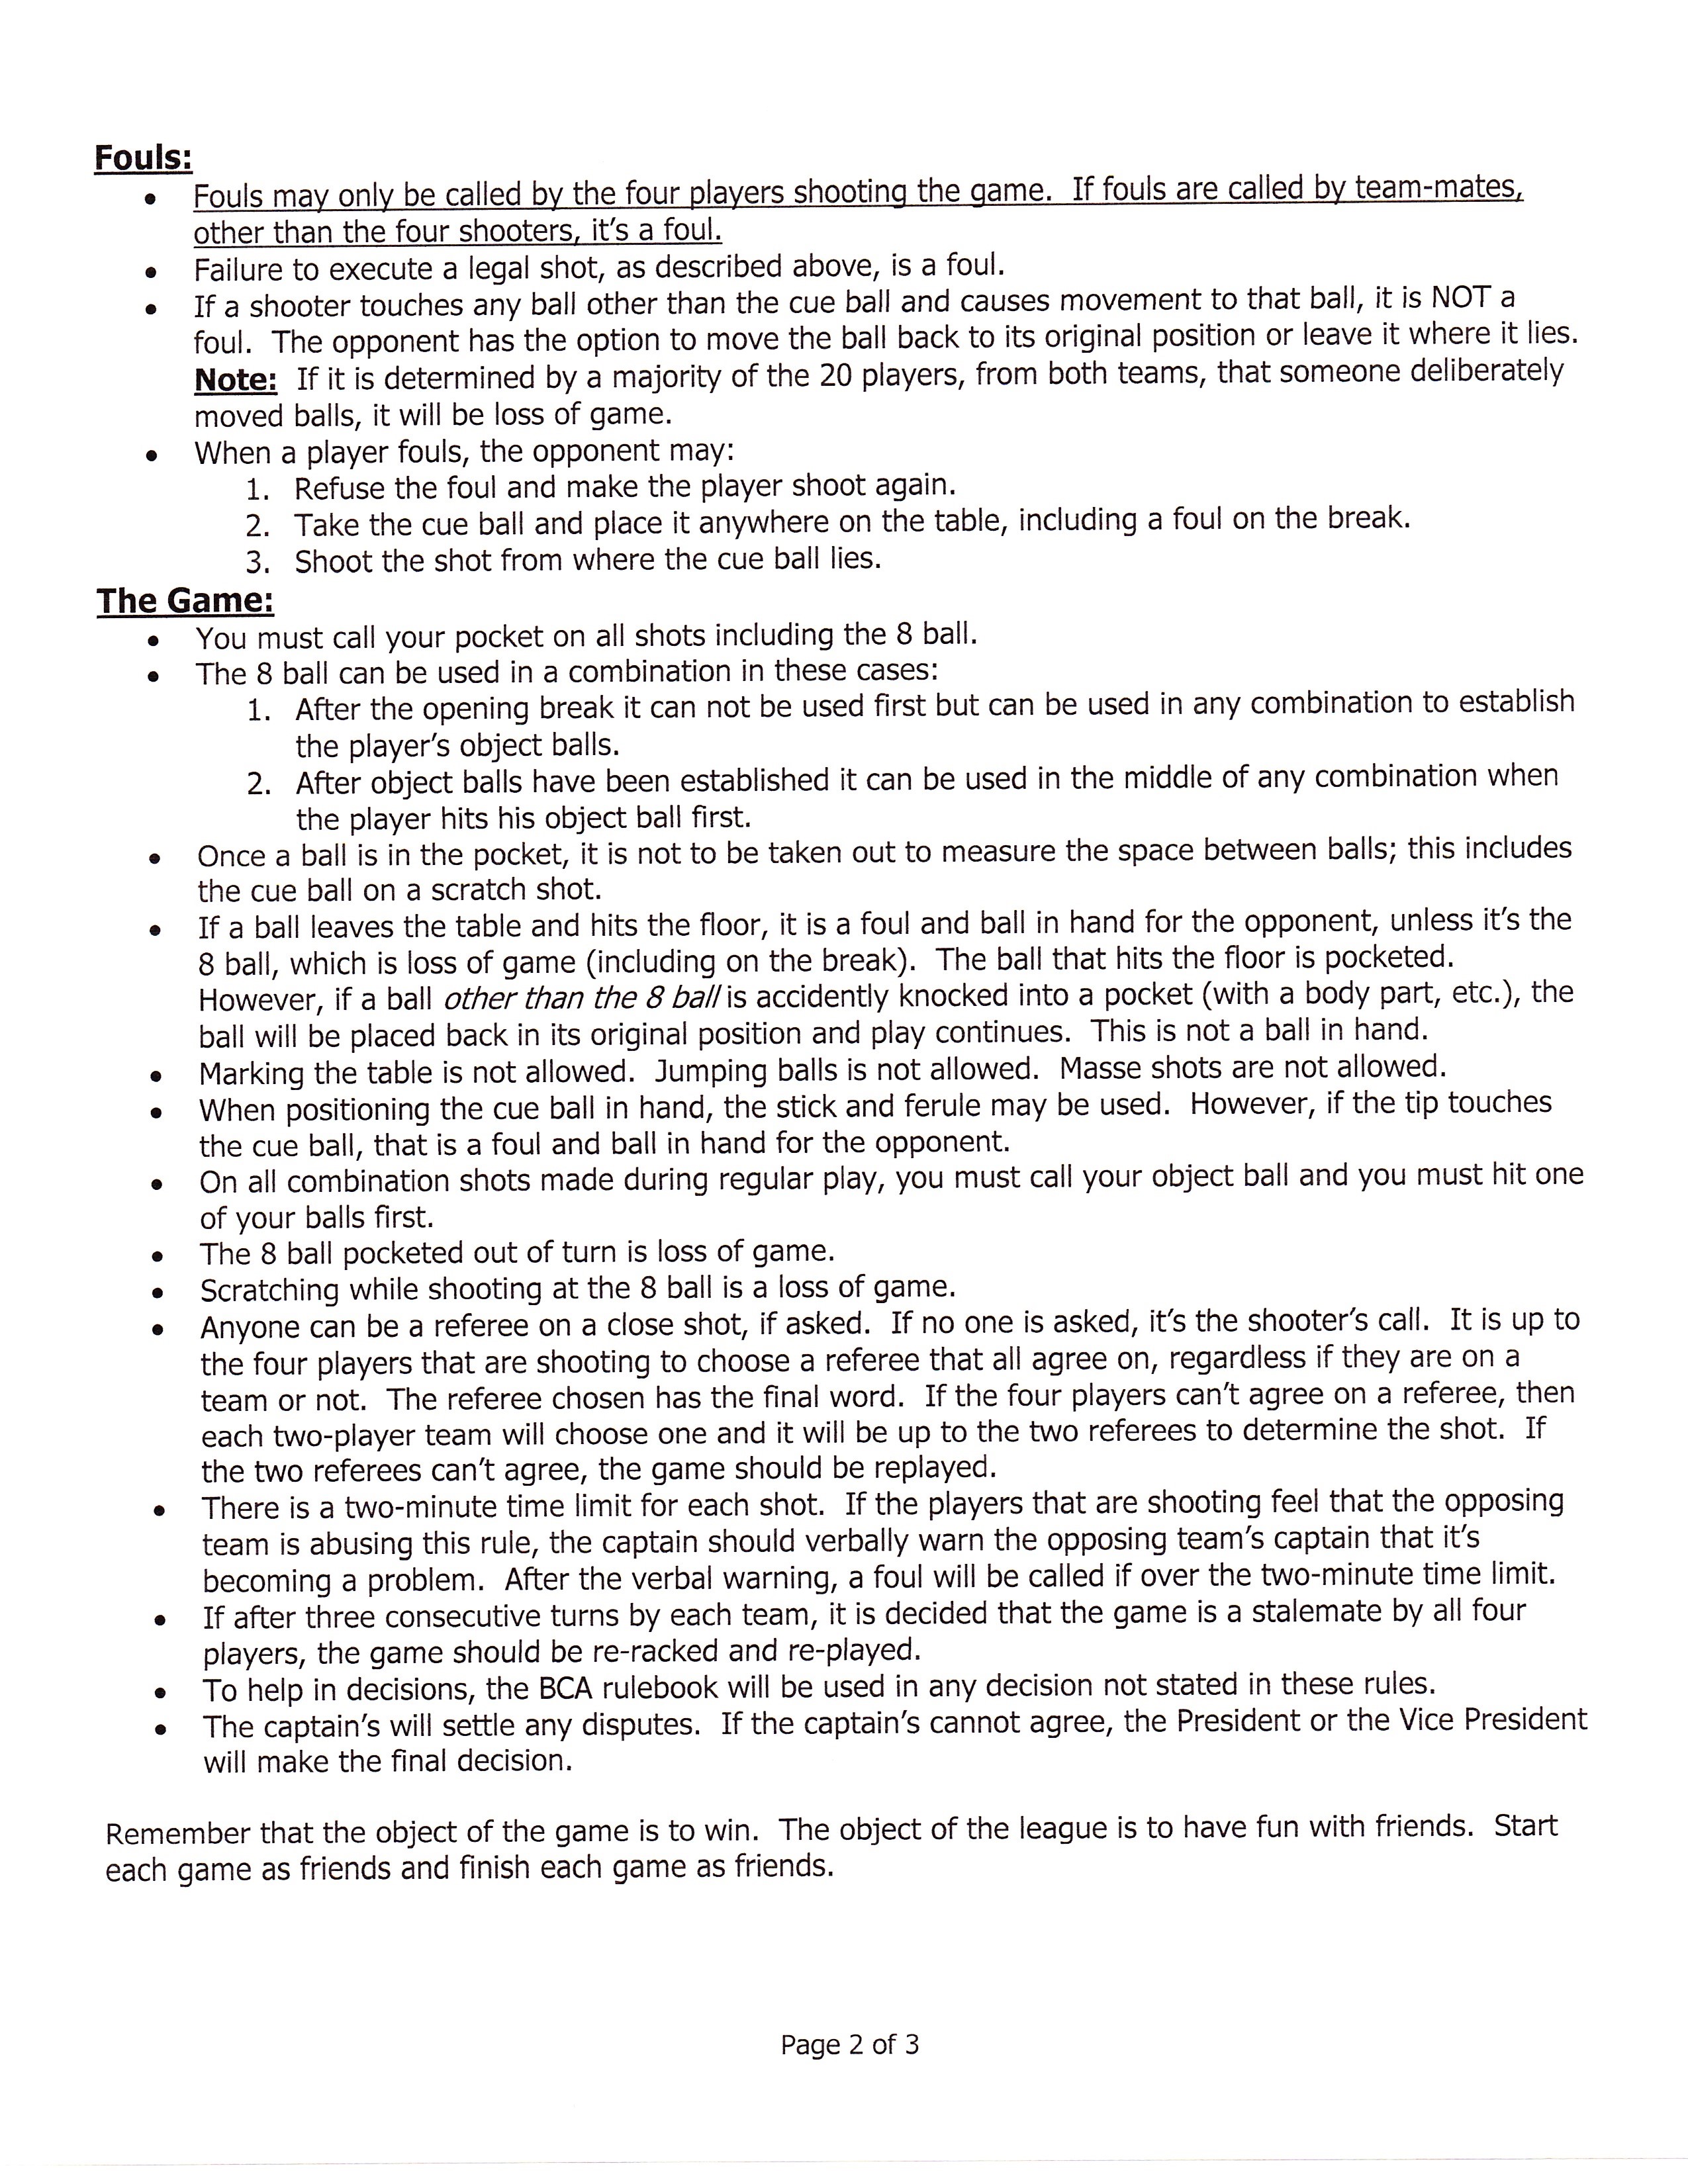 Rules2018-2019-Page2.jpg